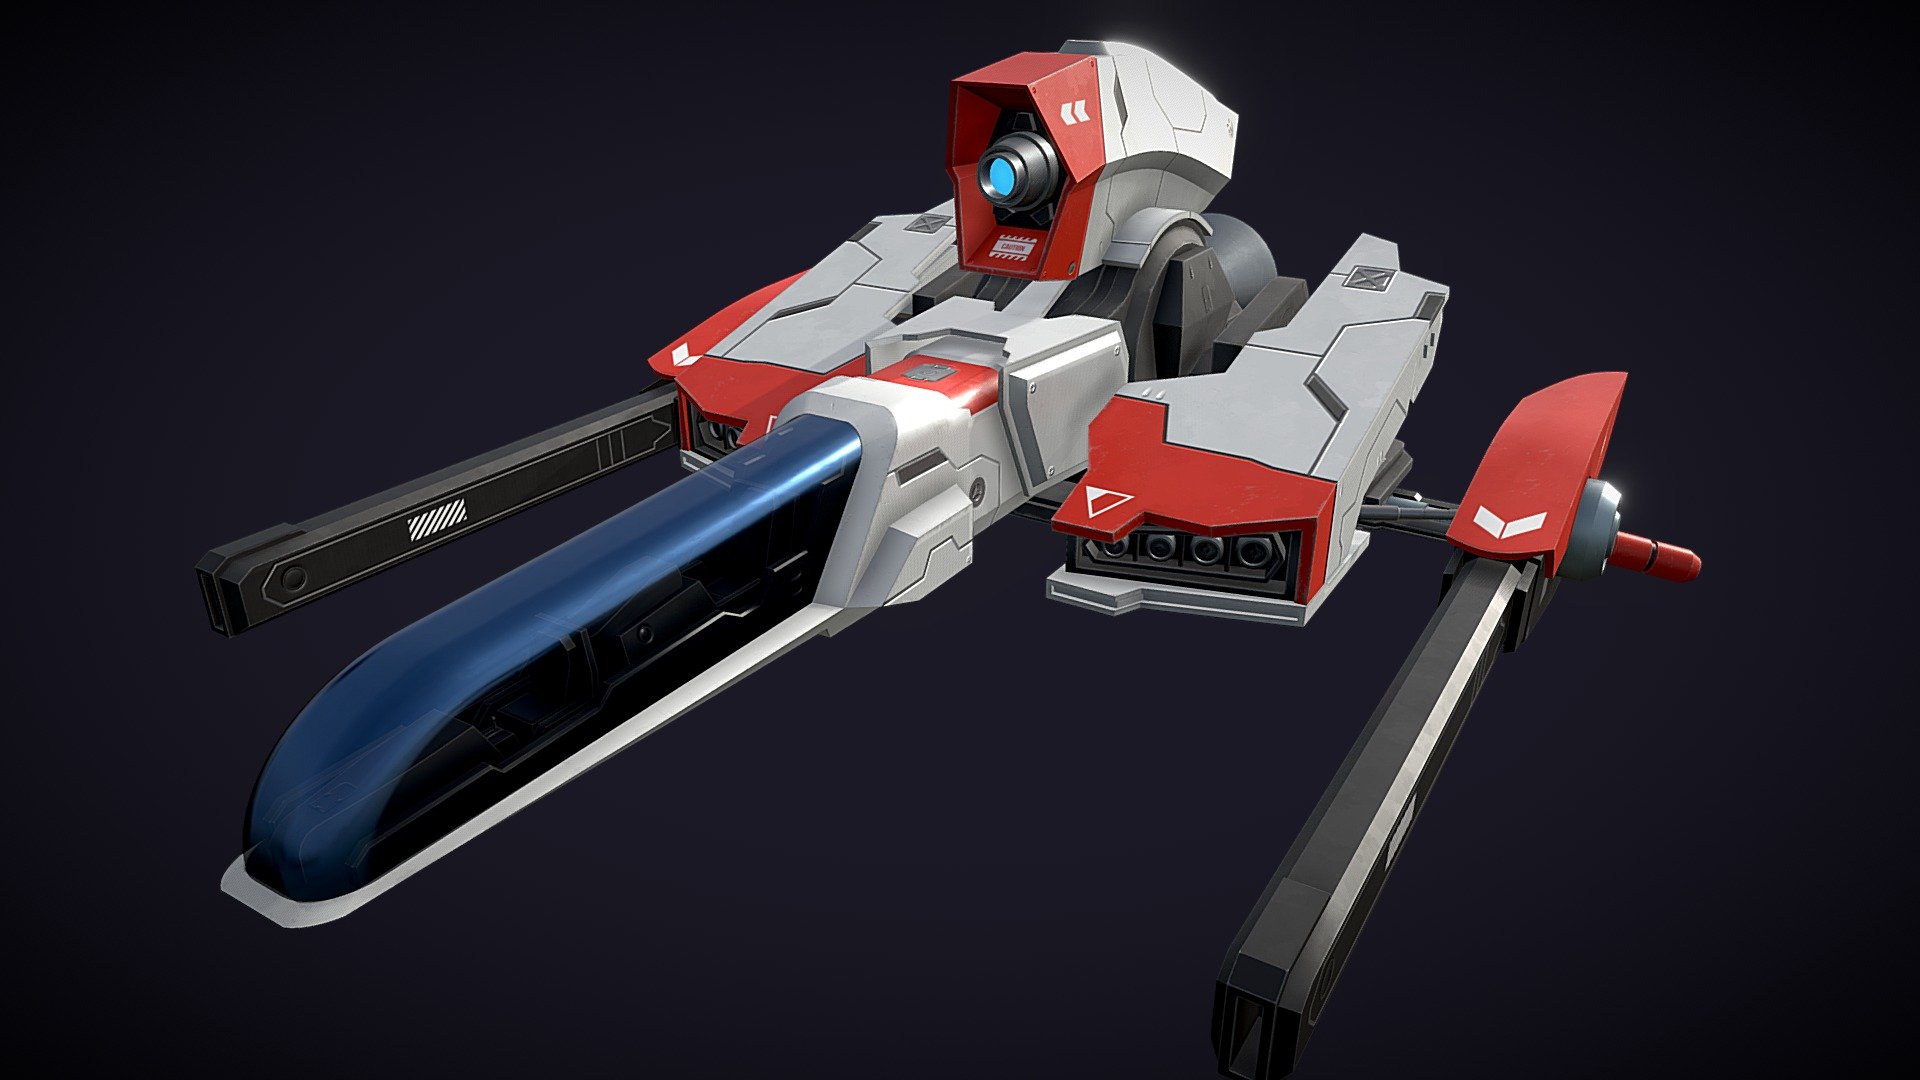 The main ship featured in the game Thunder Force IV as the newest model in the Fire LEO series developed by the Galaxy Federation, also known as &ldquo;Vasteel Original